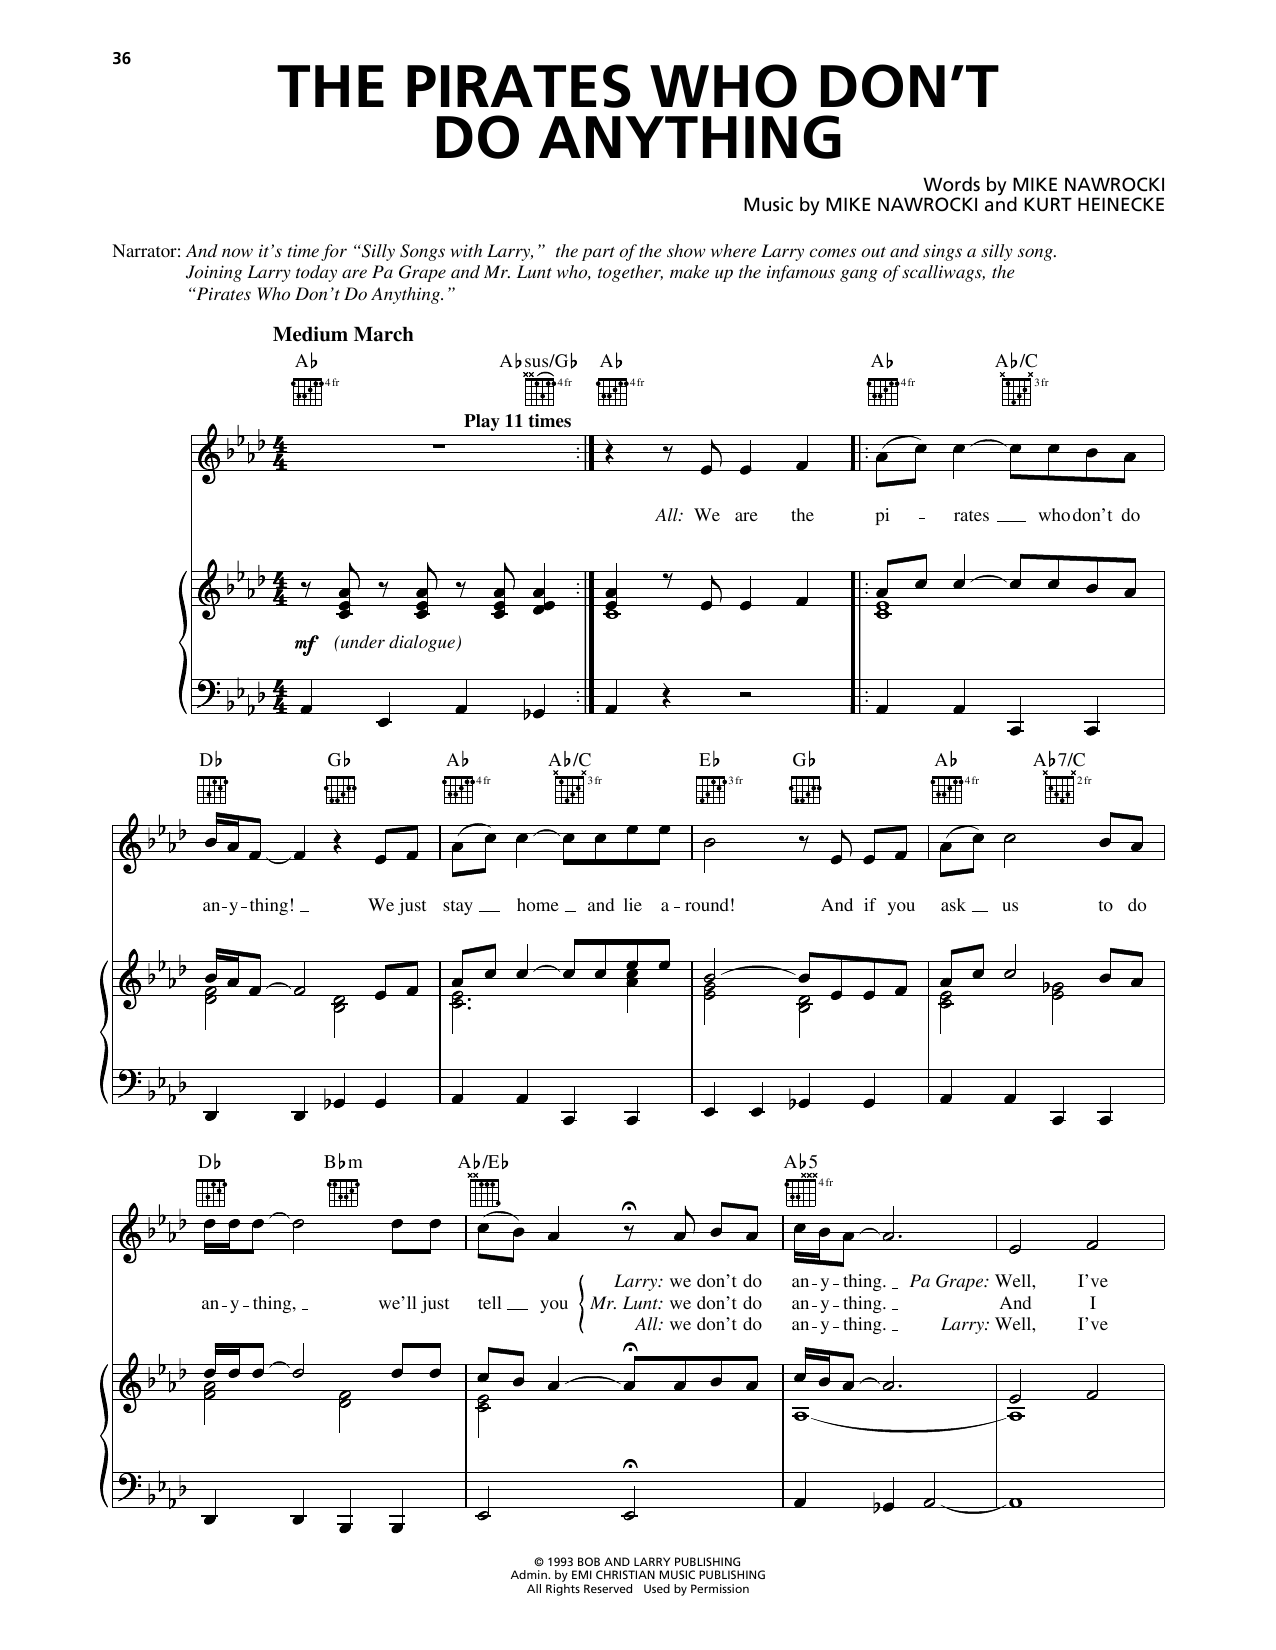 Download Mike Nawrocki The Pirates Who Don't Do Anything (from Sheet Music